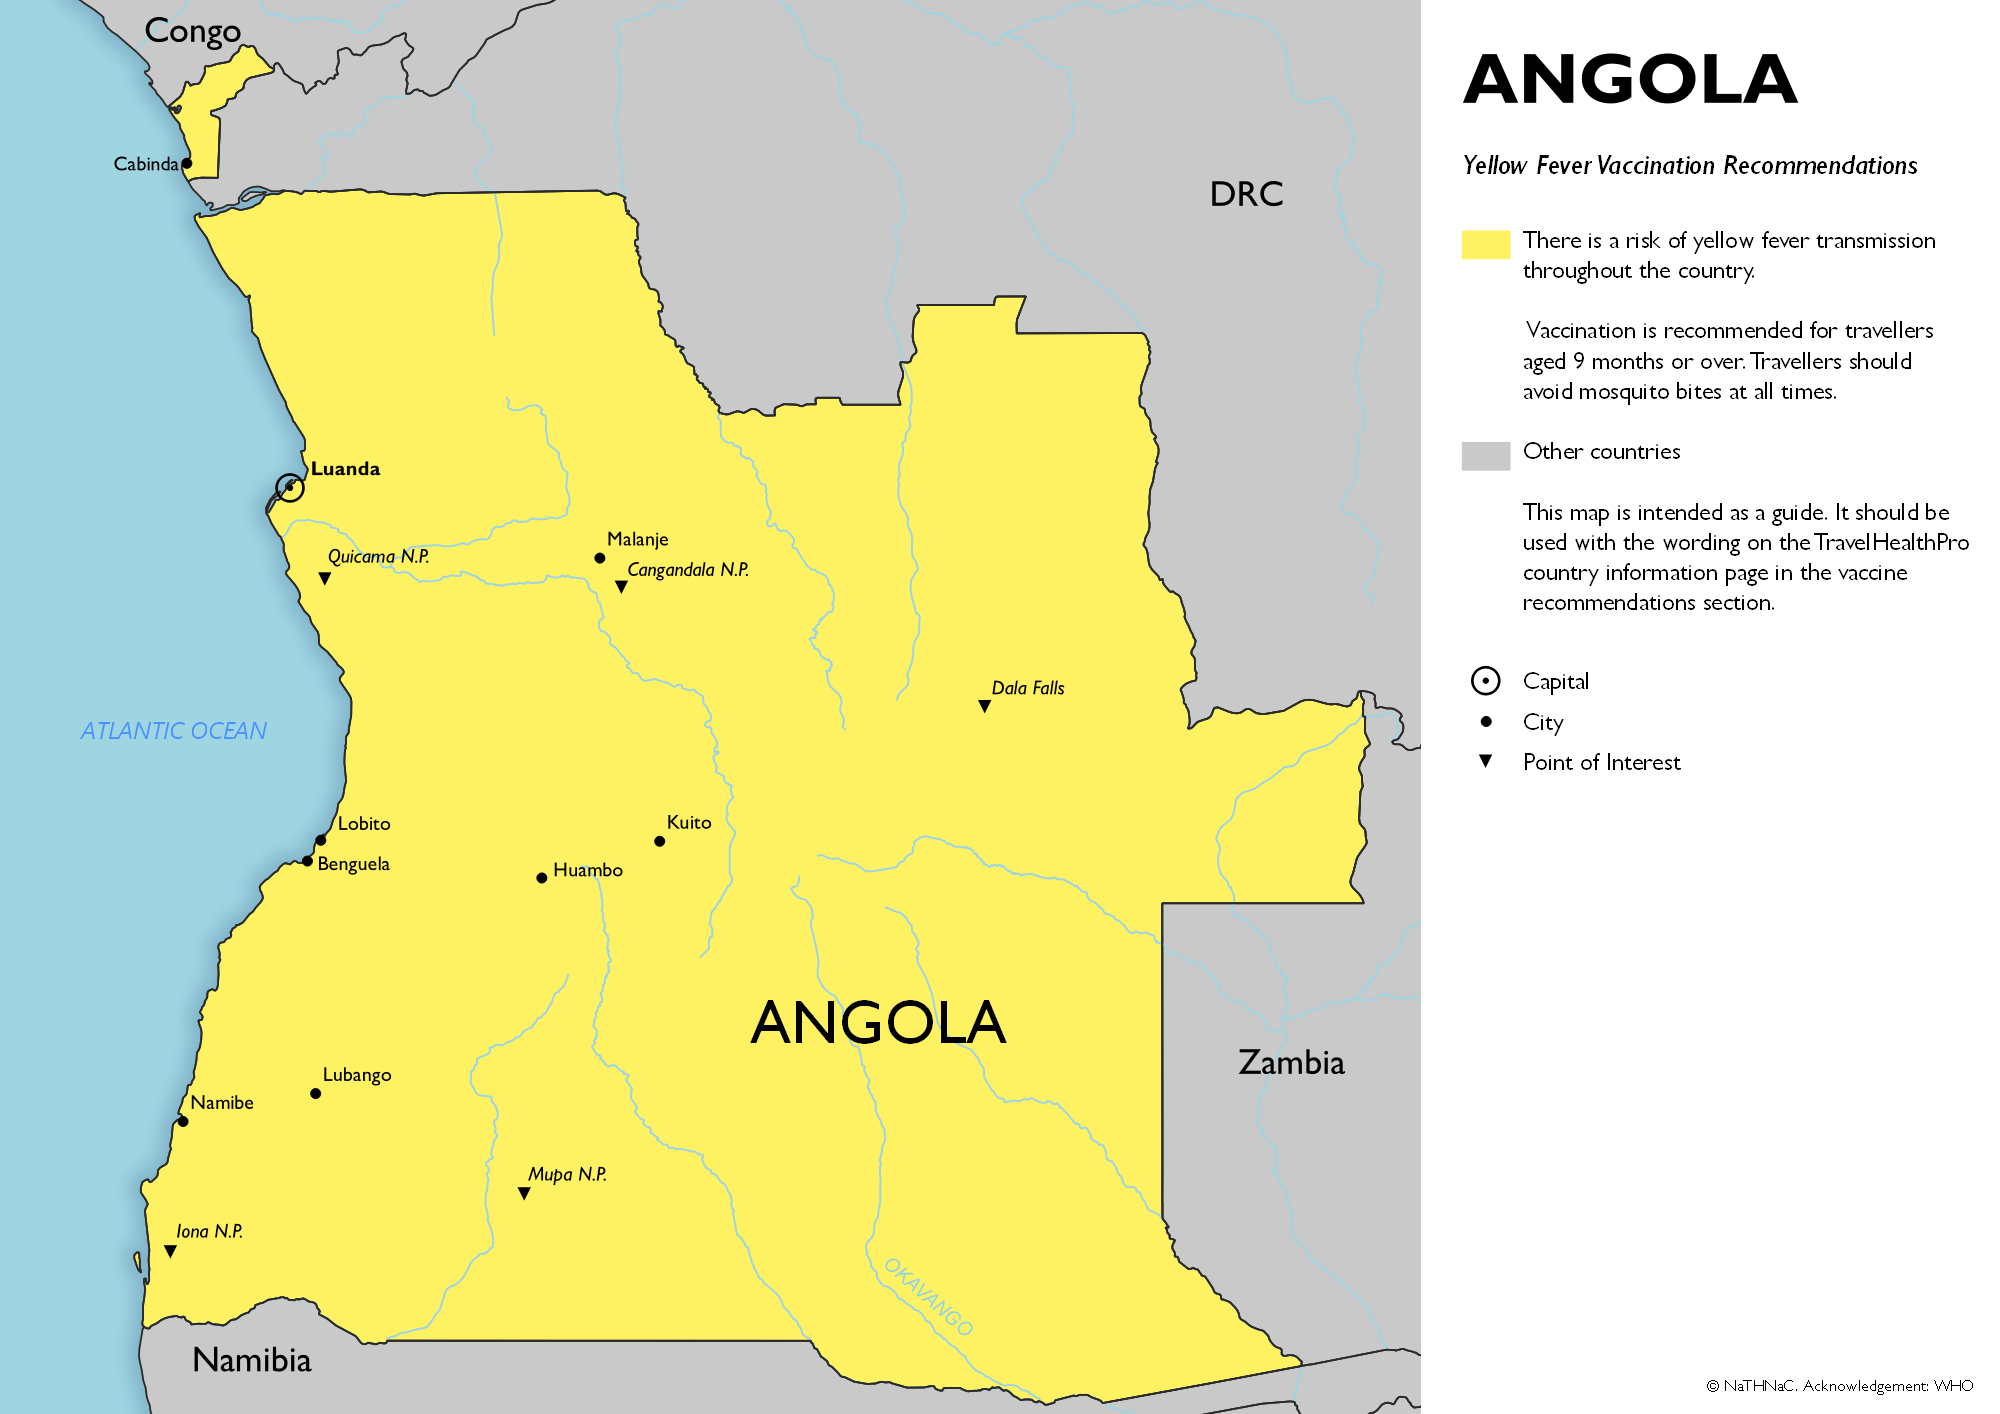 Yellow fever vaccine recommendation map for Angola